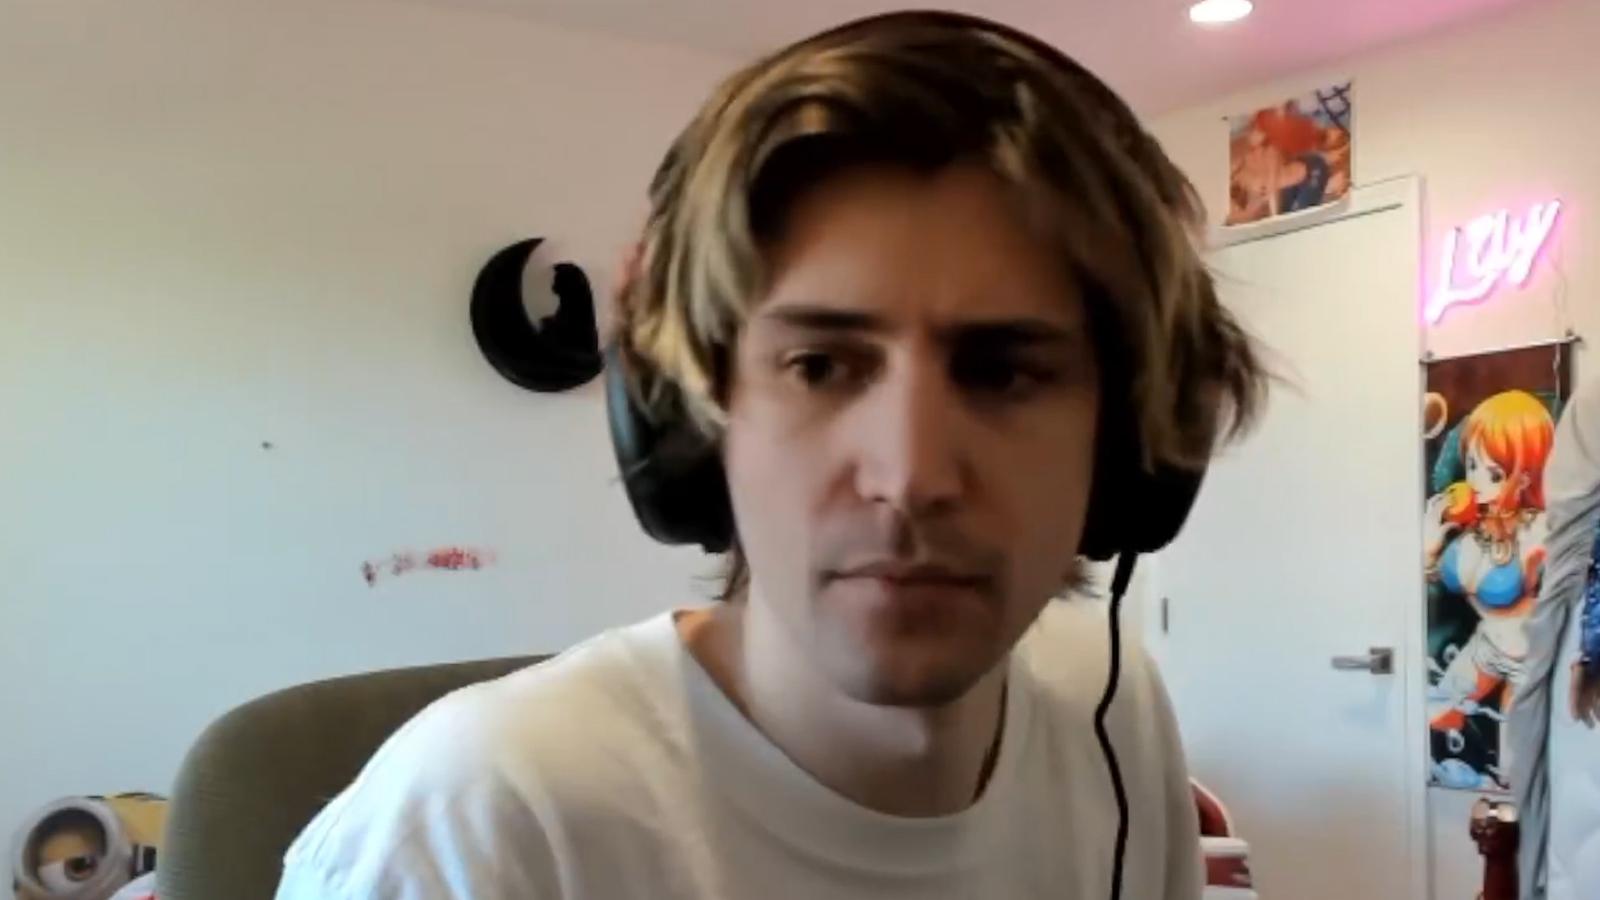 xqc staring at camera on twitch stream